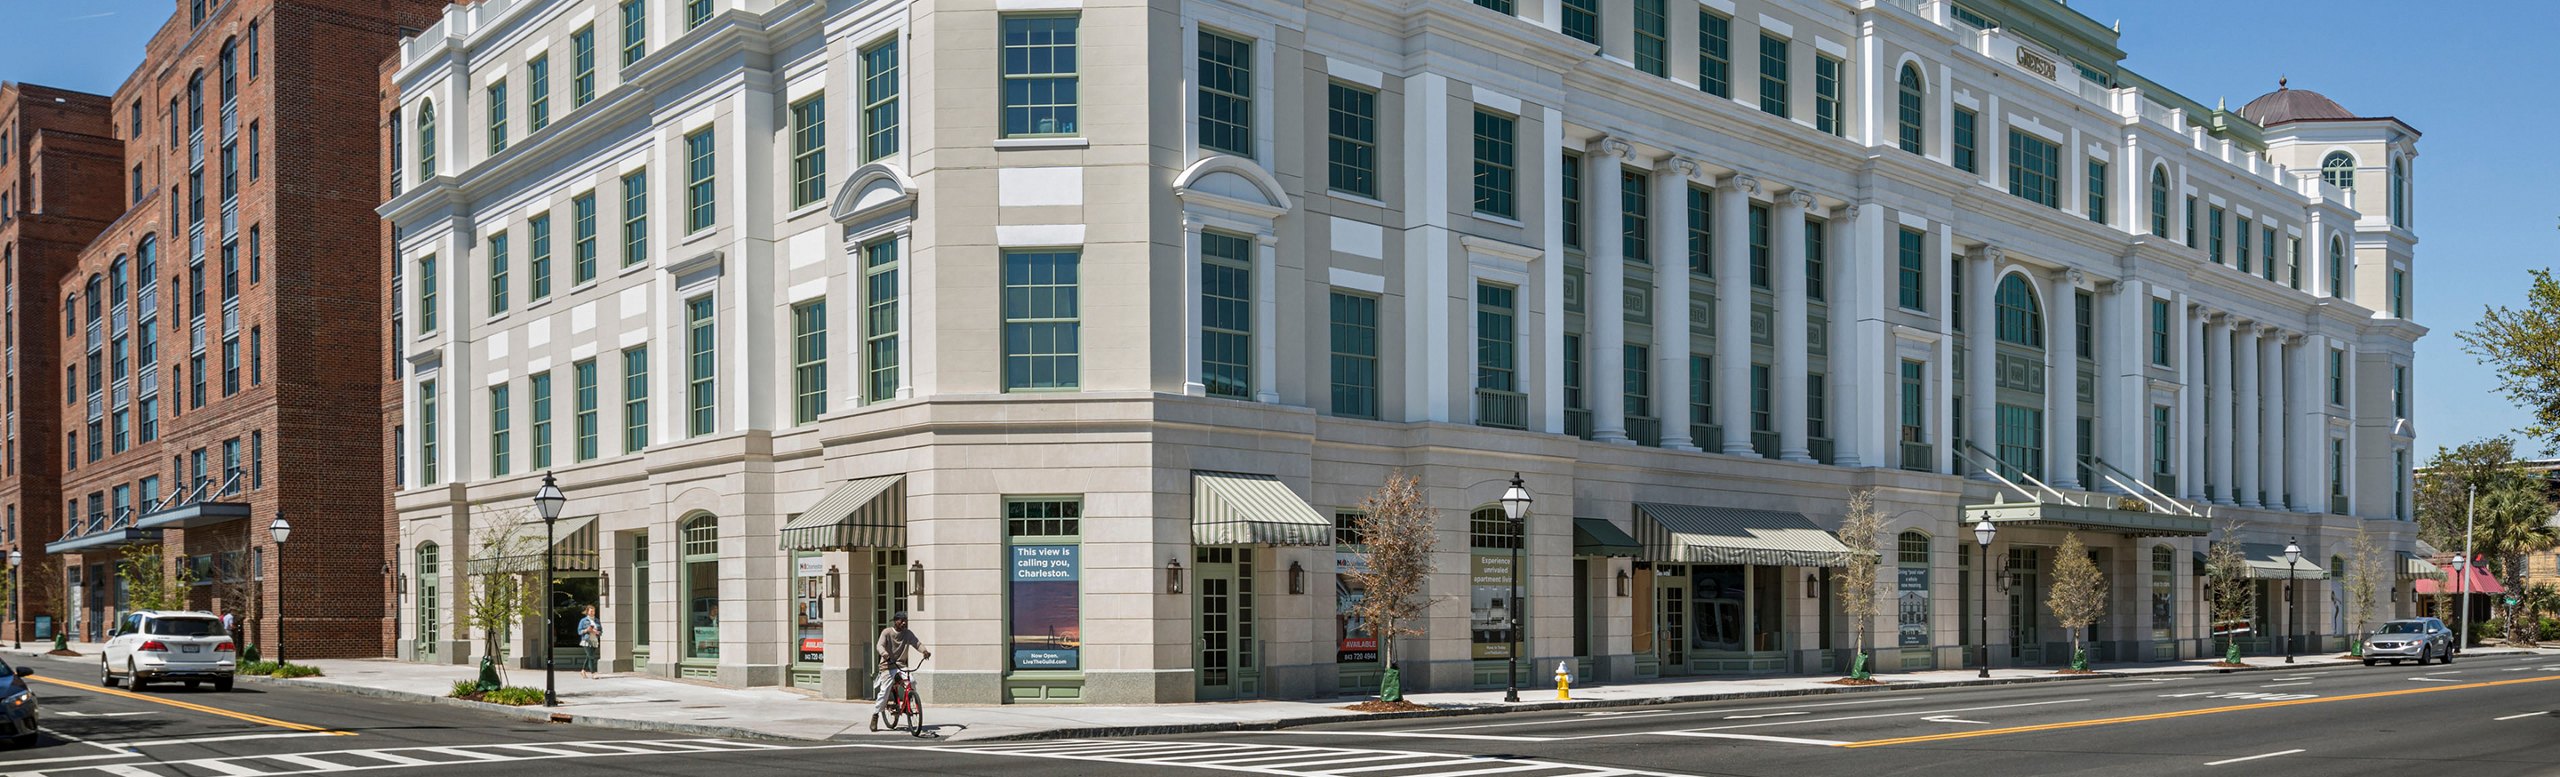 Classic and modern architecture blend in this streetscape featuring a new, elegant white building with prominent columns beside a traditional red brick structure.